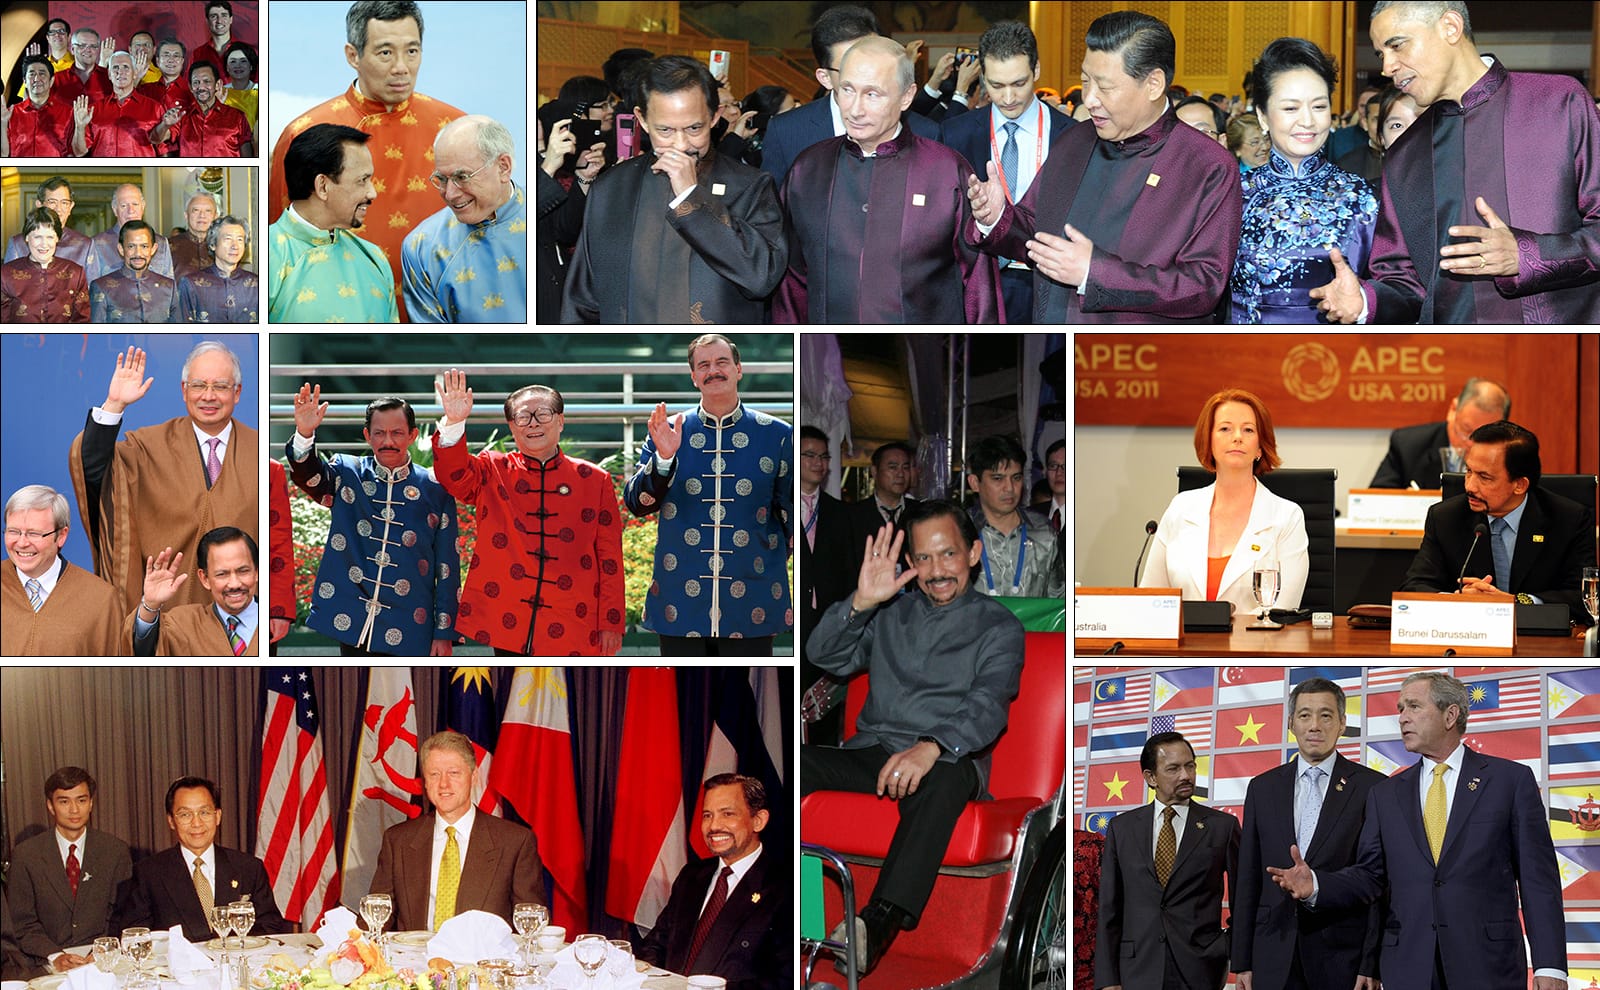 Sultan of Brunei Hassanal Bolkiah with regional leaders at APEC summits across the years (Getty Images)